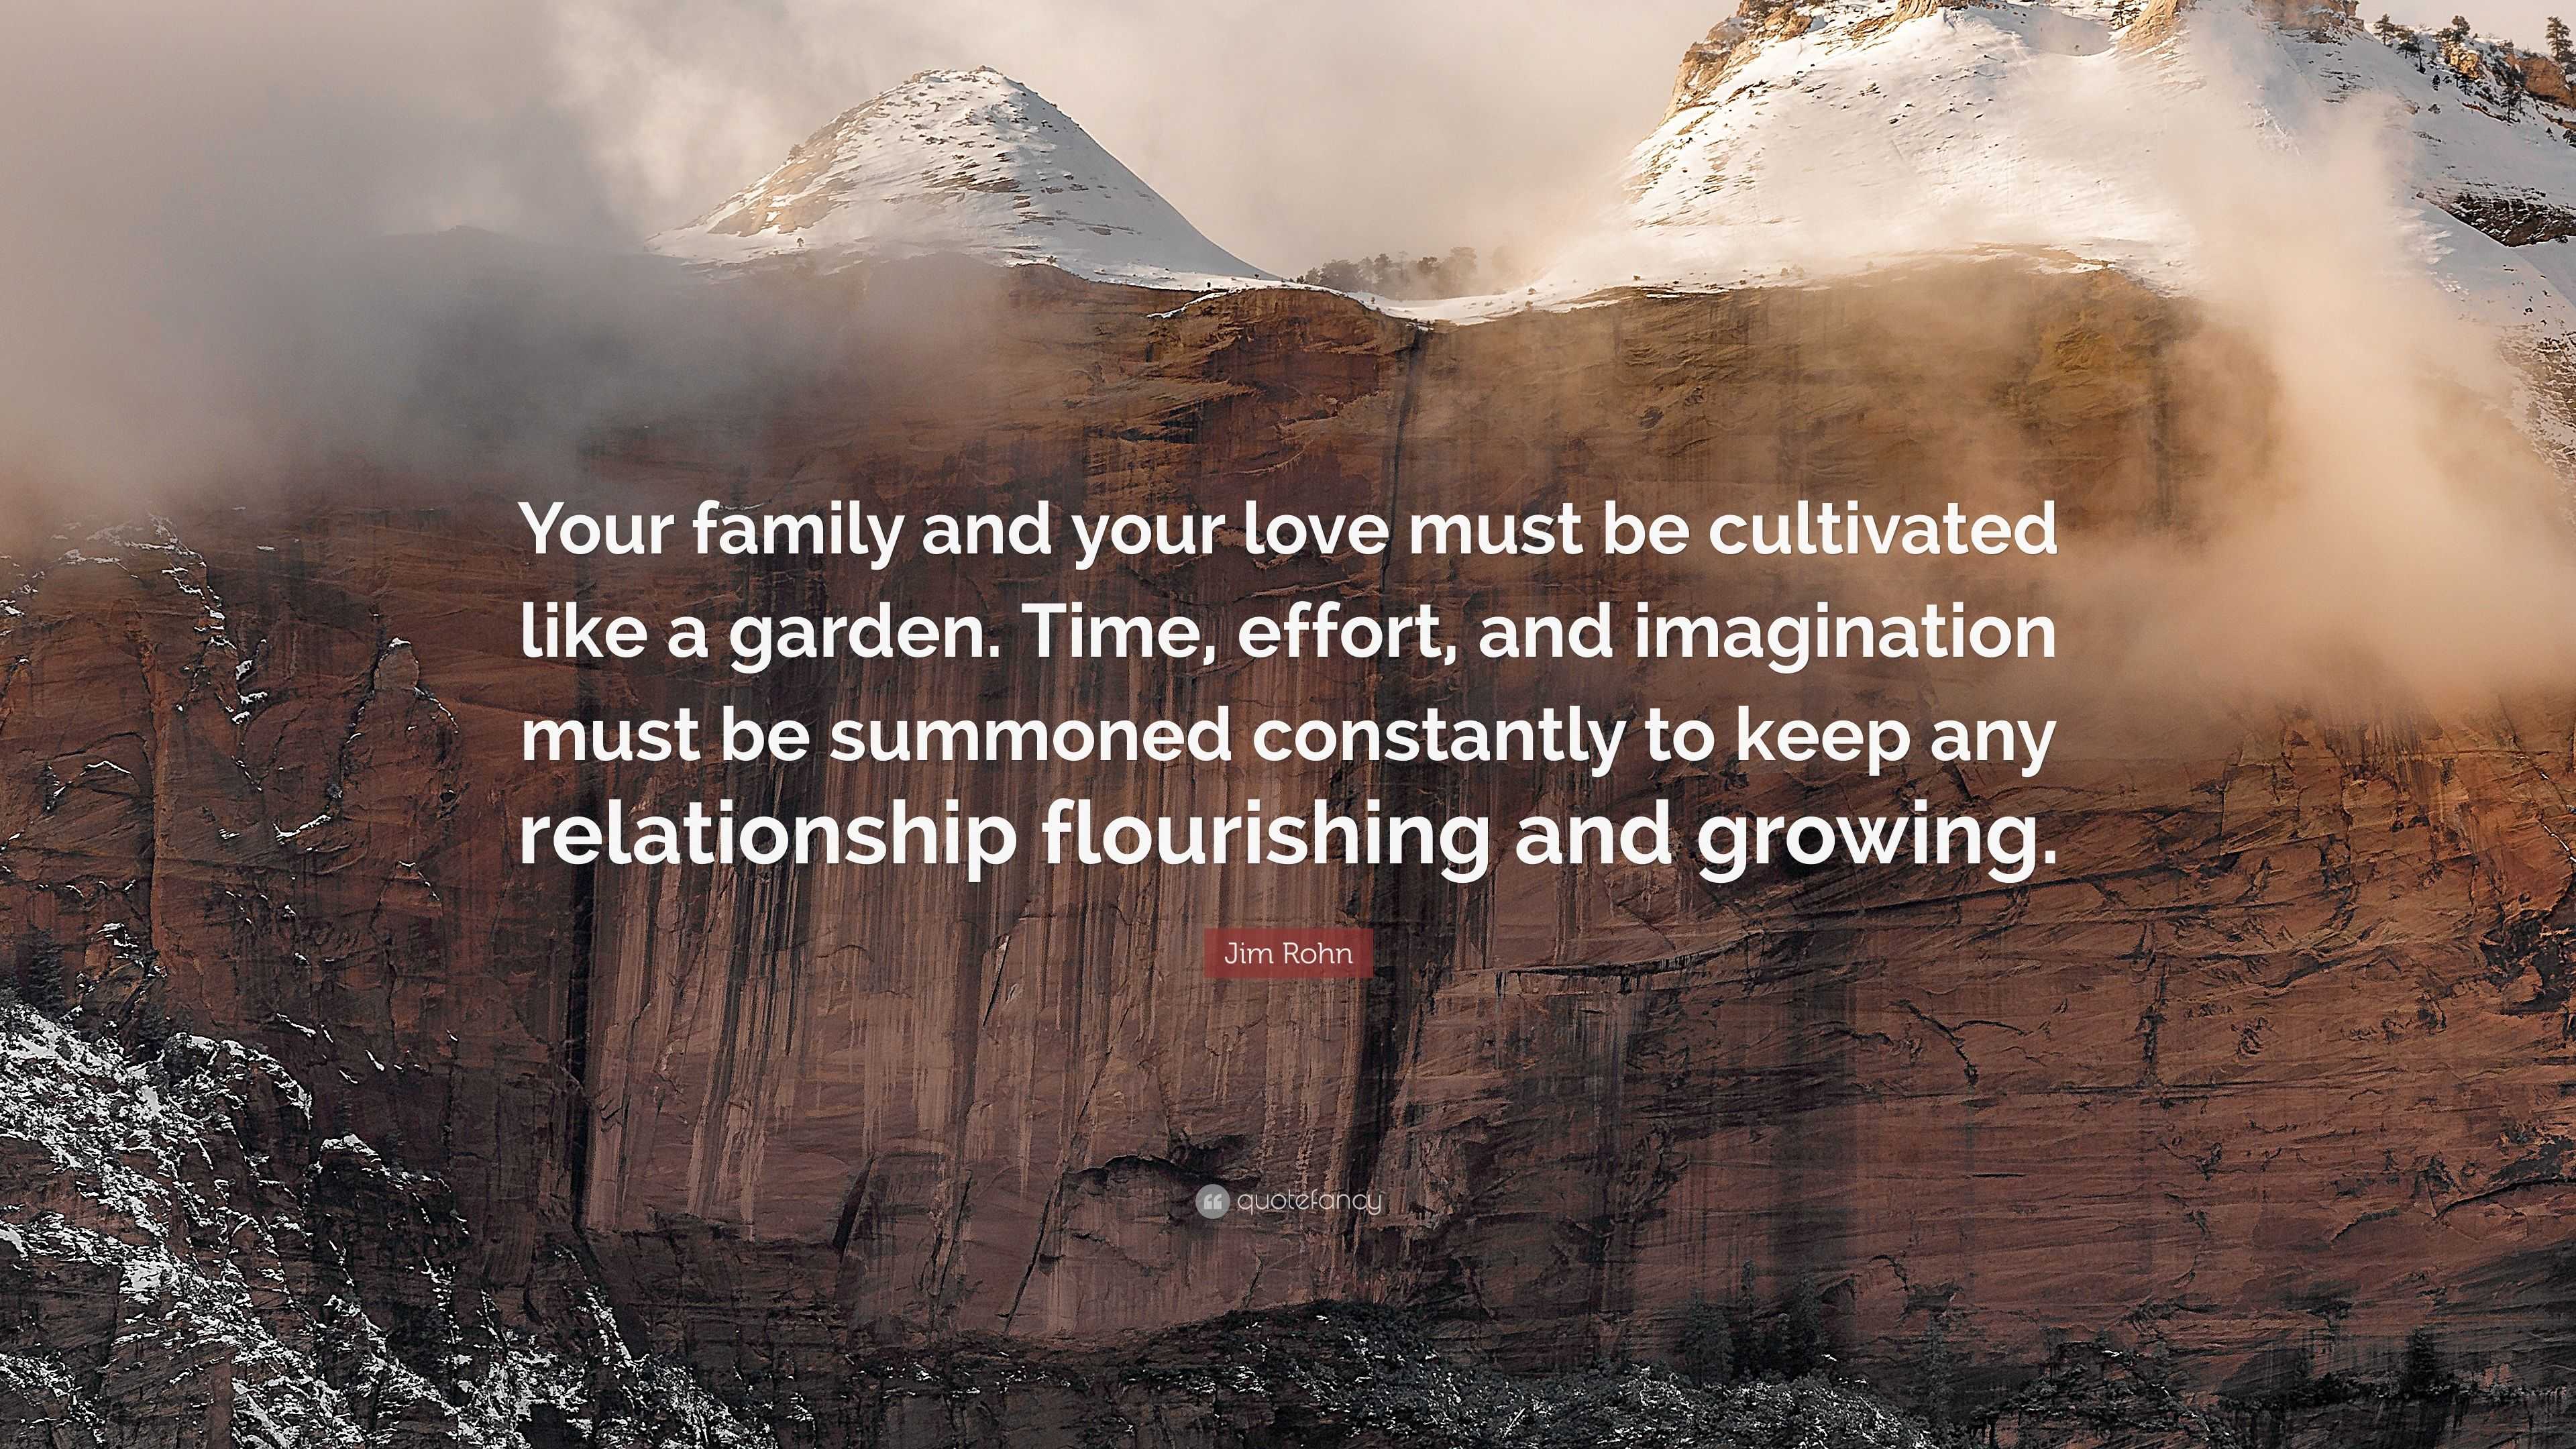 Jim Rohn Quote “Your family and your love must be cultivated like a garden